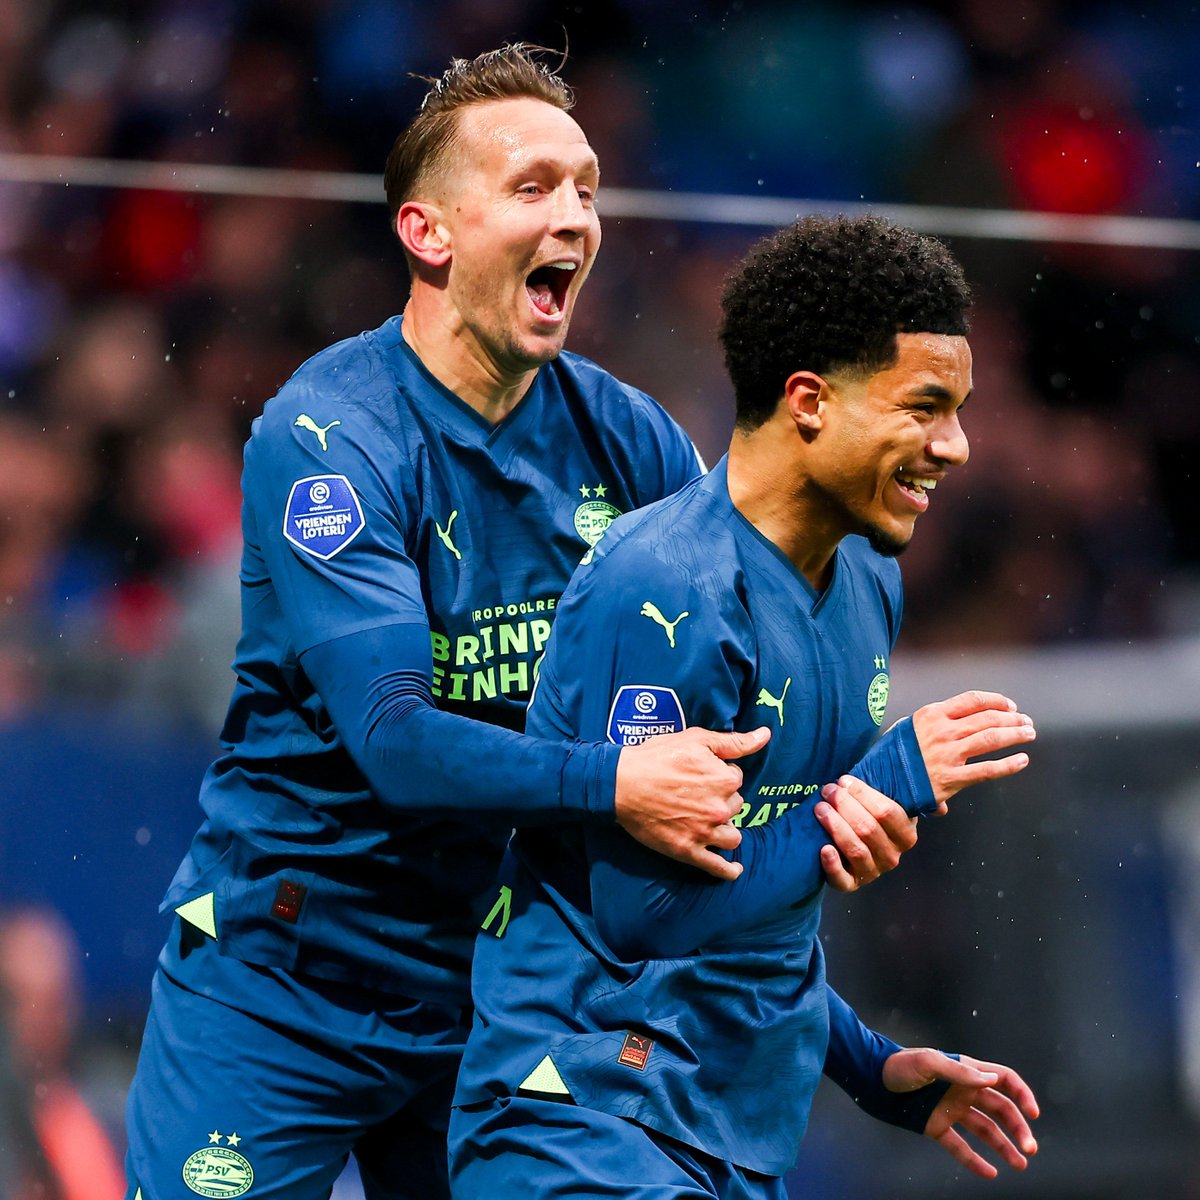 🇳🇱 PSV in Eredivisie this season: 

𝟭𝟬𝟯 scored ⚽️
𝟭𝟳 conceded 🚫
+𝟴𝟲 goal difference 📊

🤯